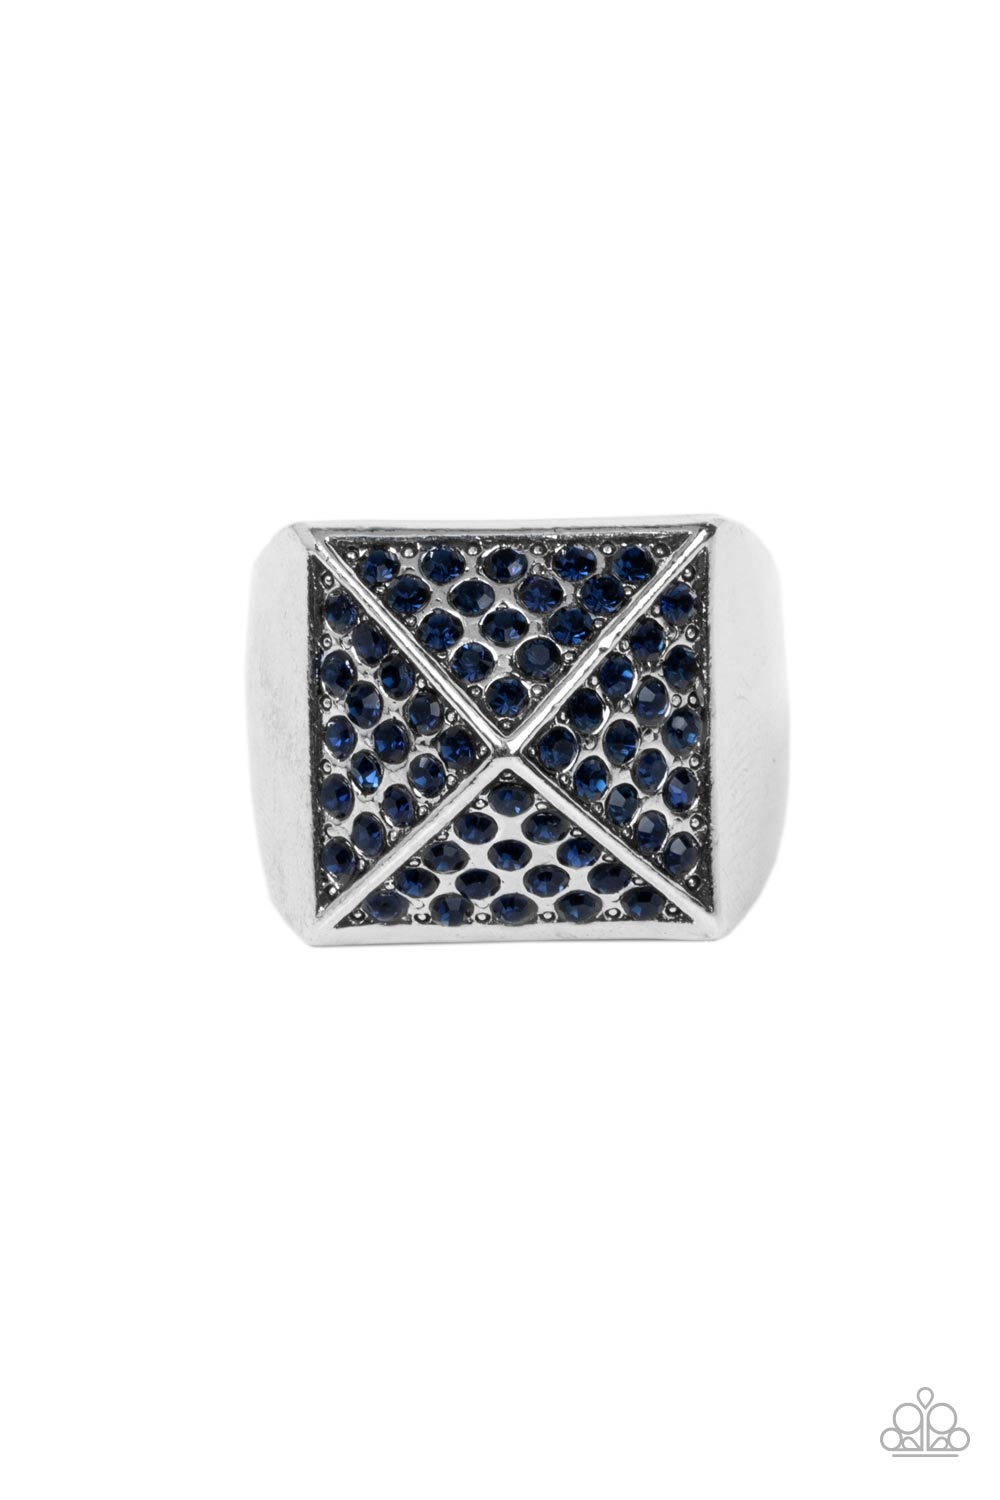 Pyramidal Powerhouse Blue Urban Ring - Paparazzi Accessories  Encrusted in glassy blue rhinestones, silver triangular frames build into a pyramidal centerpiece atop a thick silver band for a dauntless look. Features a stretchy band for a flexible fit.  Sold as one individual ring.